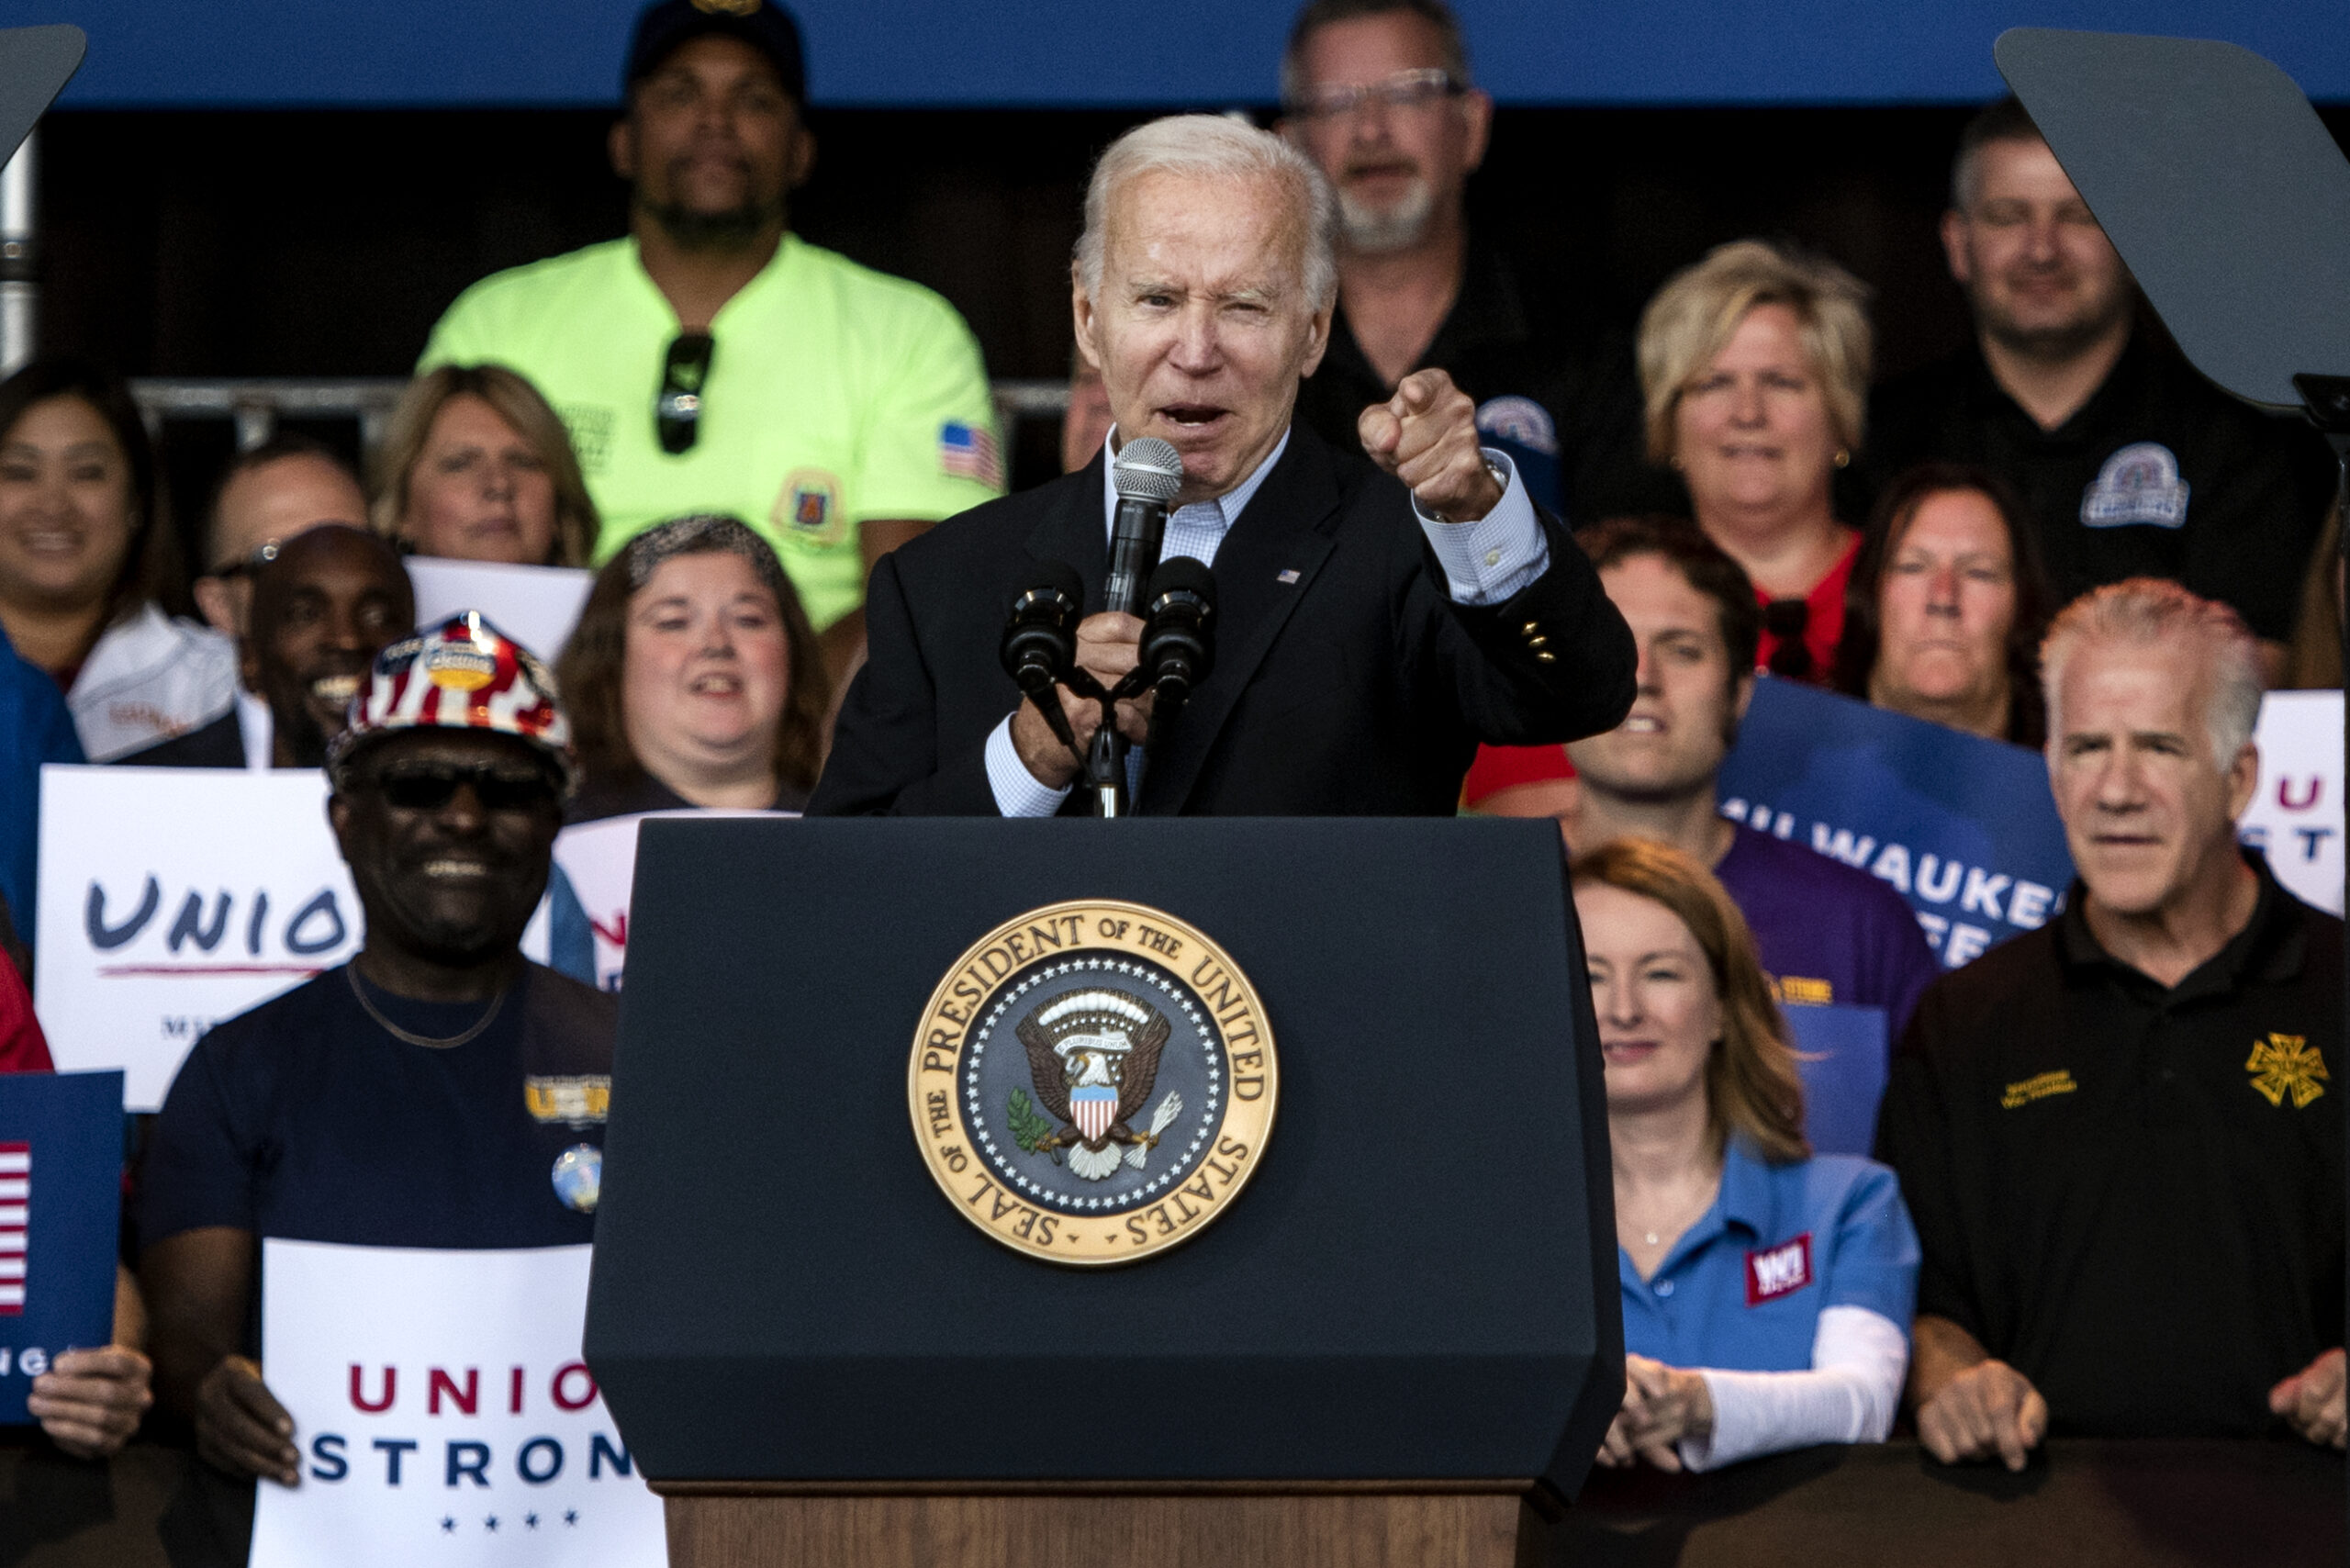 Pres. Joe Biden points at the crowd as he speaks at a podium.